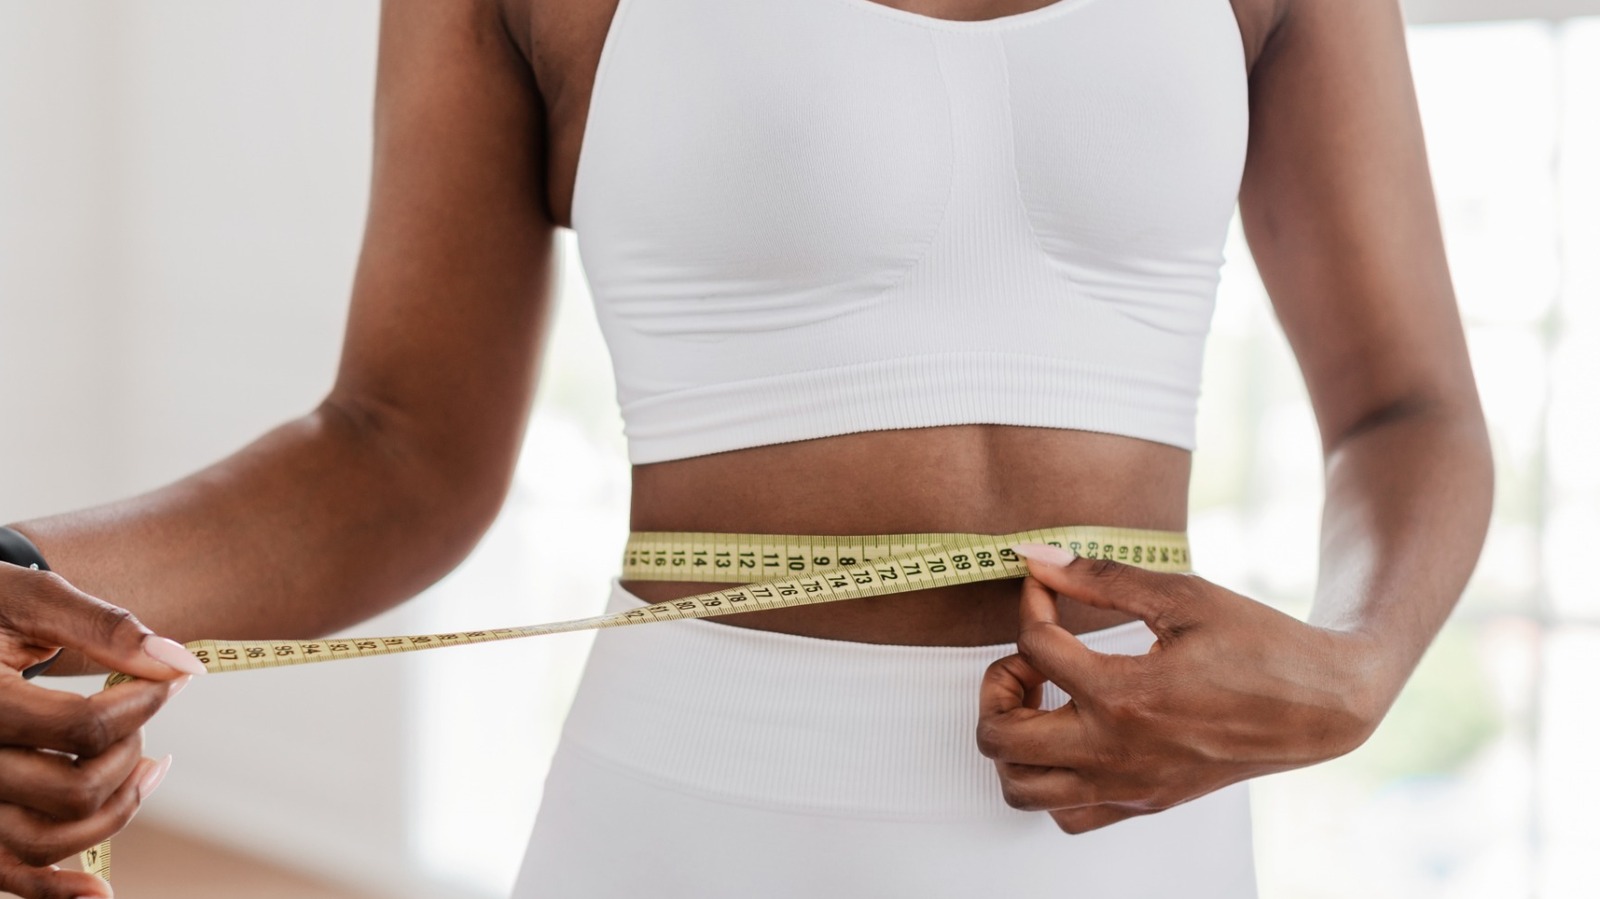 If You Lose Weight Too Quickly, This Is What Happens To Your Body